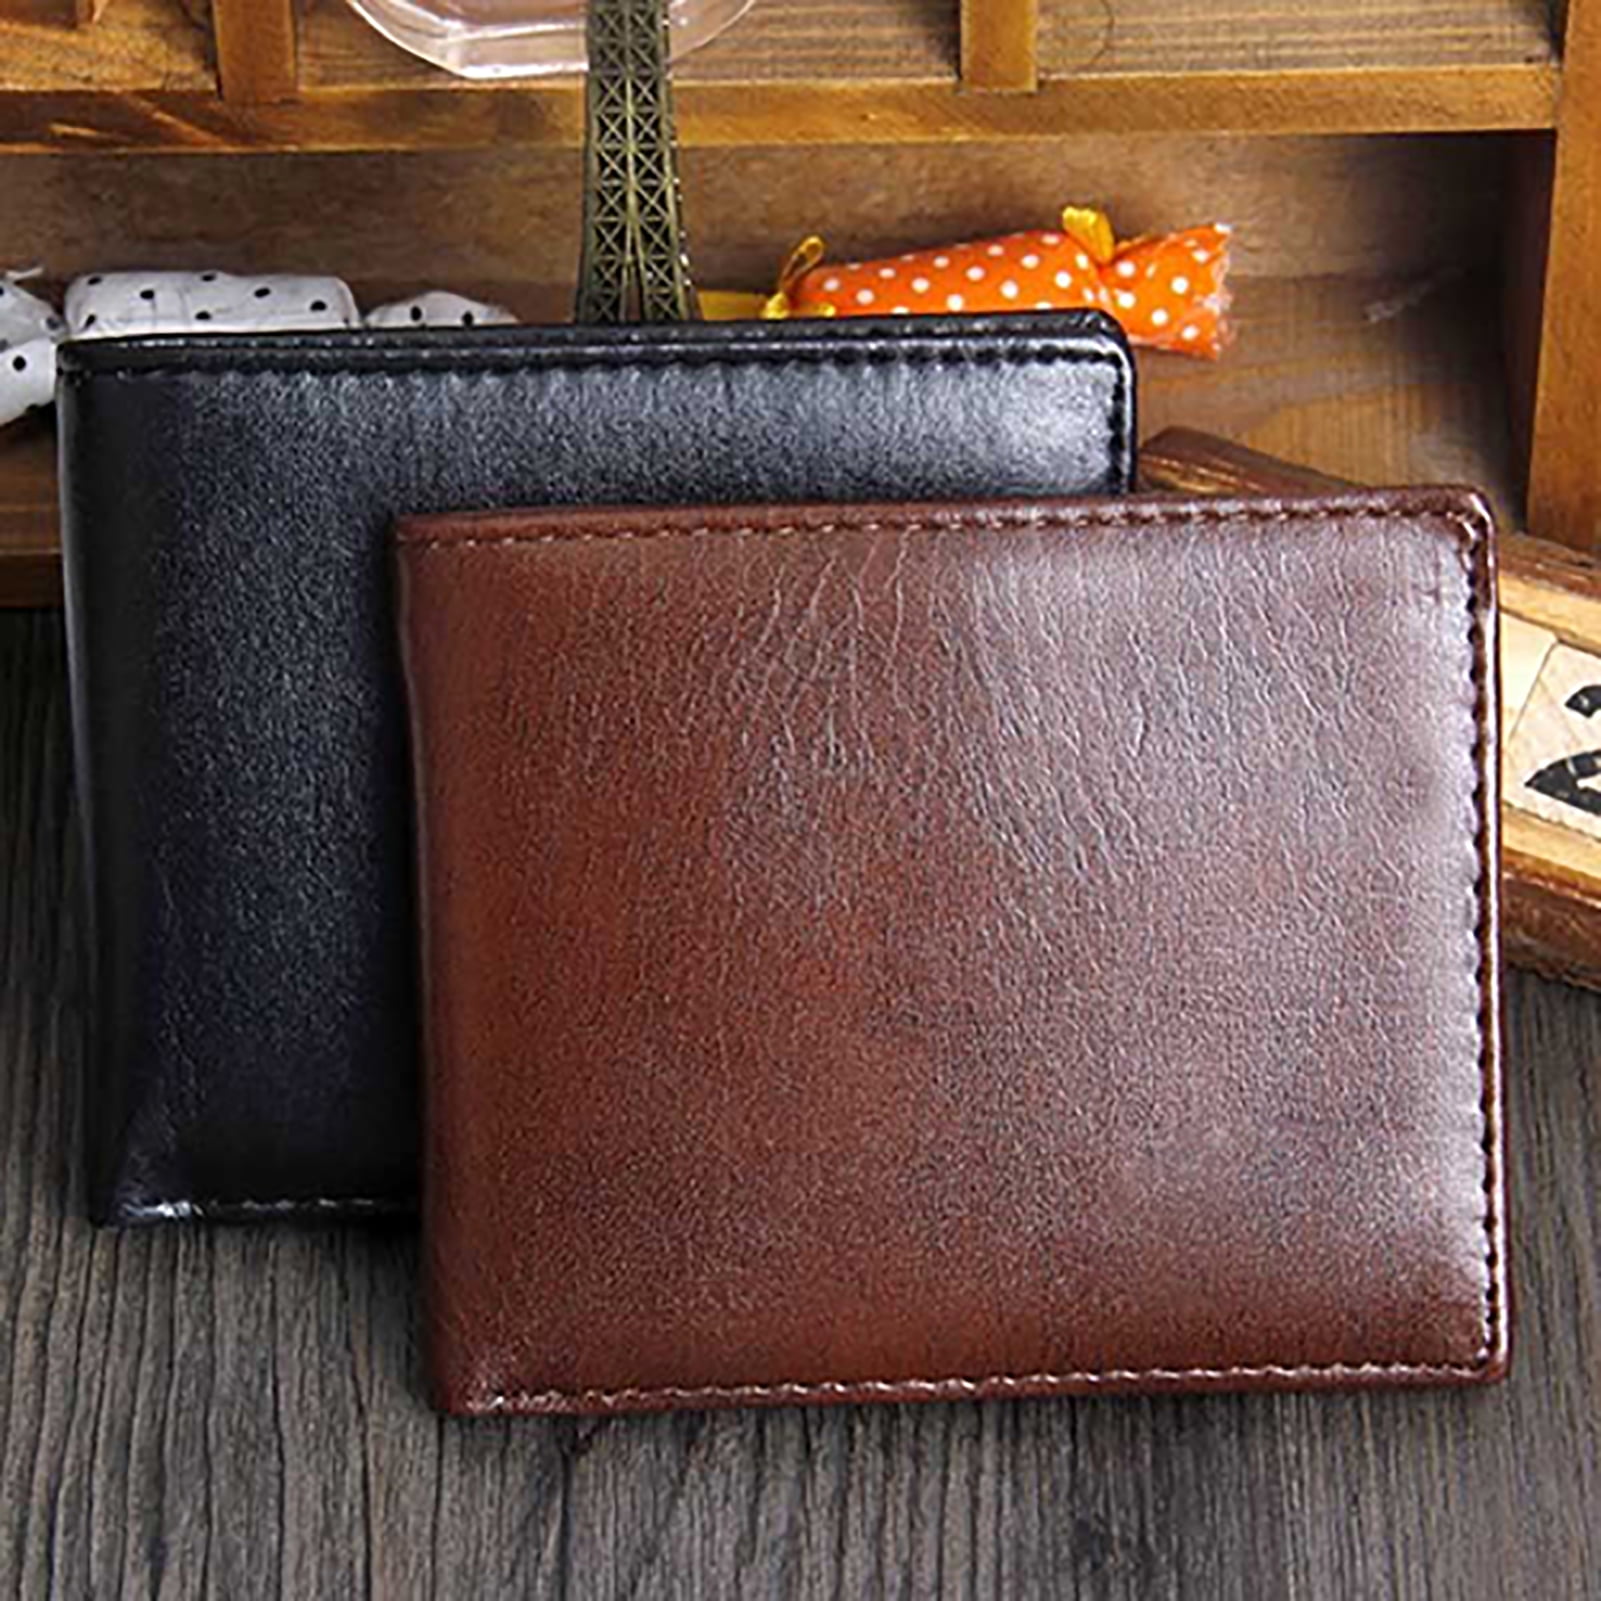 New Mens Luxury Leather Wallet Card Holder Coin Pockets Bifold Money Clip Purse 